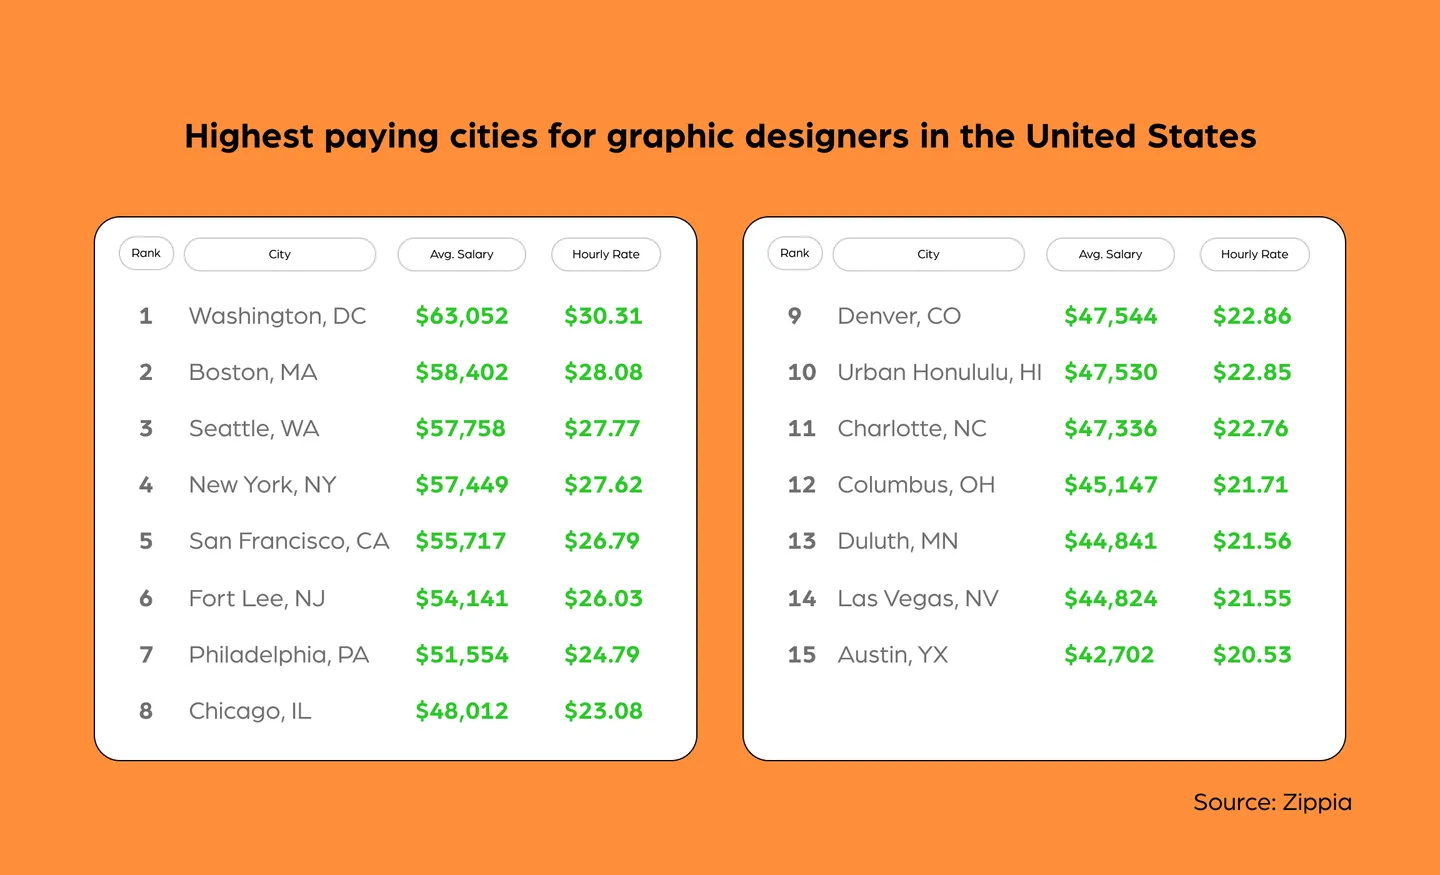 Top 15 highest paying cities for graphic designers